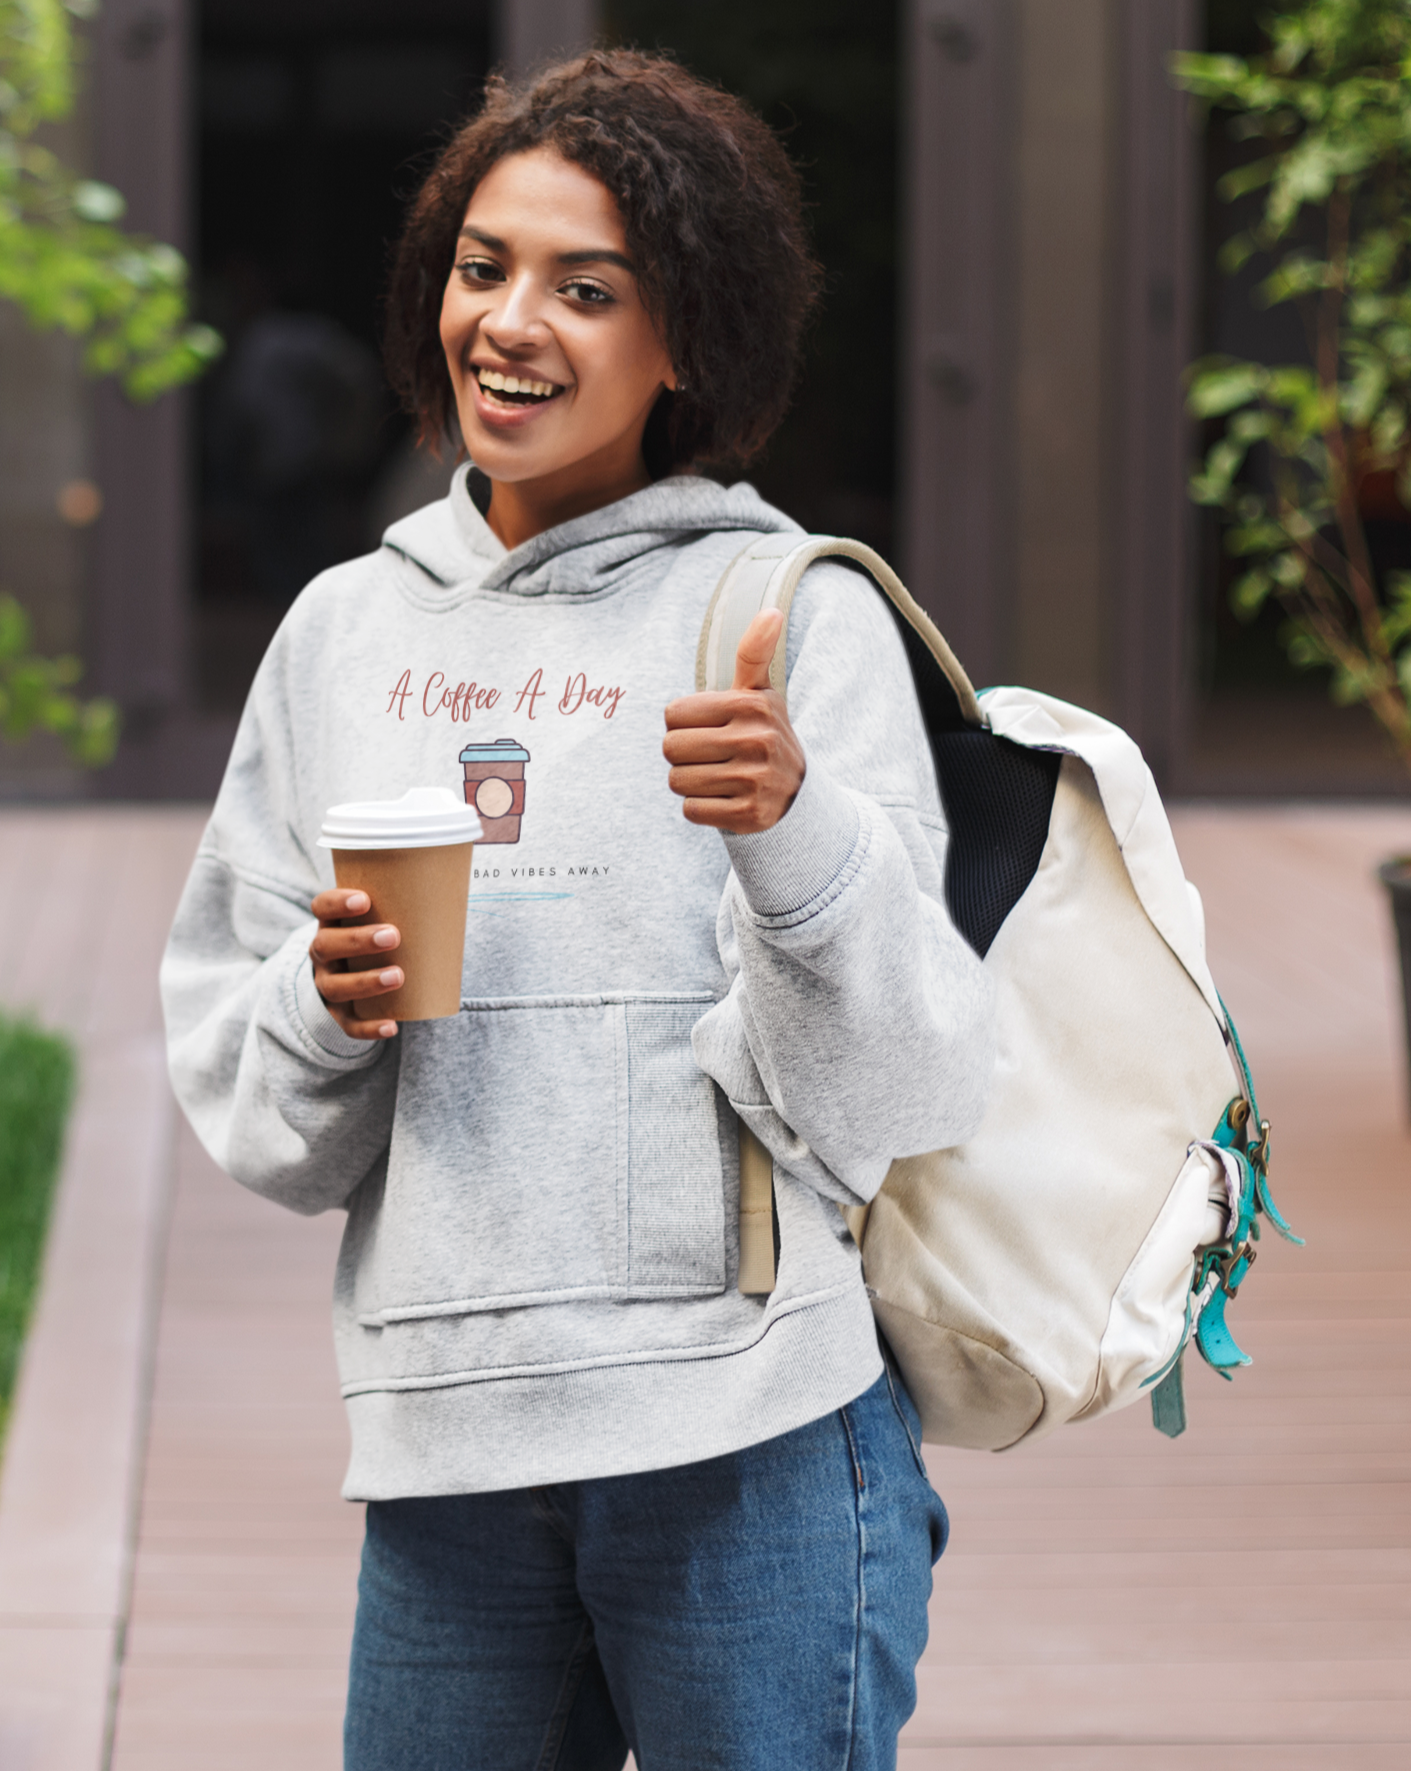 Keep the bad vibes away with a coffee (or two) a day.  This funny coffee hoodie shows off your love for caffeine and made with a soft cotton material, you can stay comfy all day long. Designed for the girl who loves coffee and has great style.